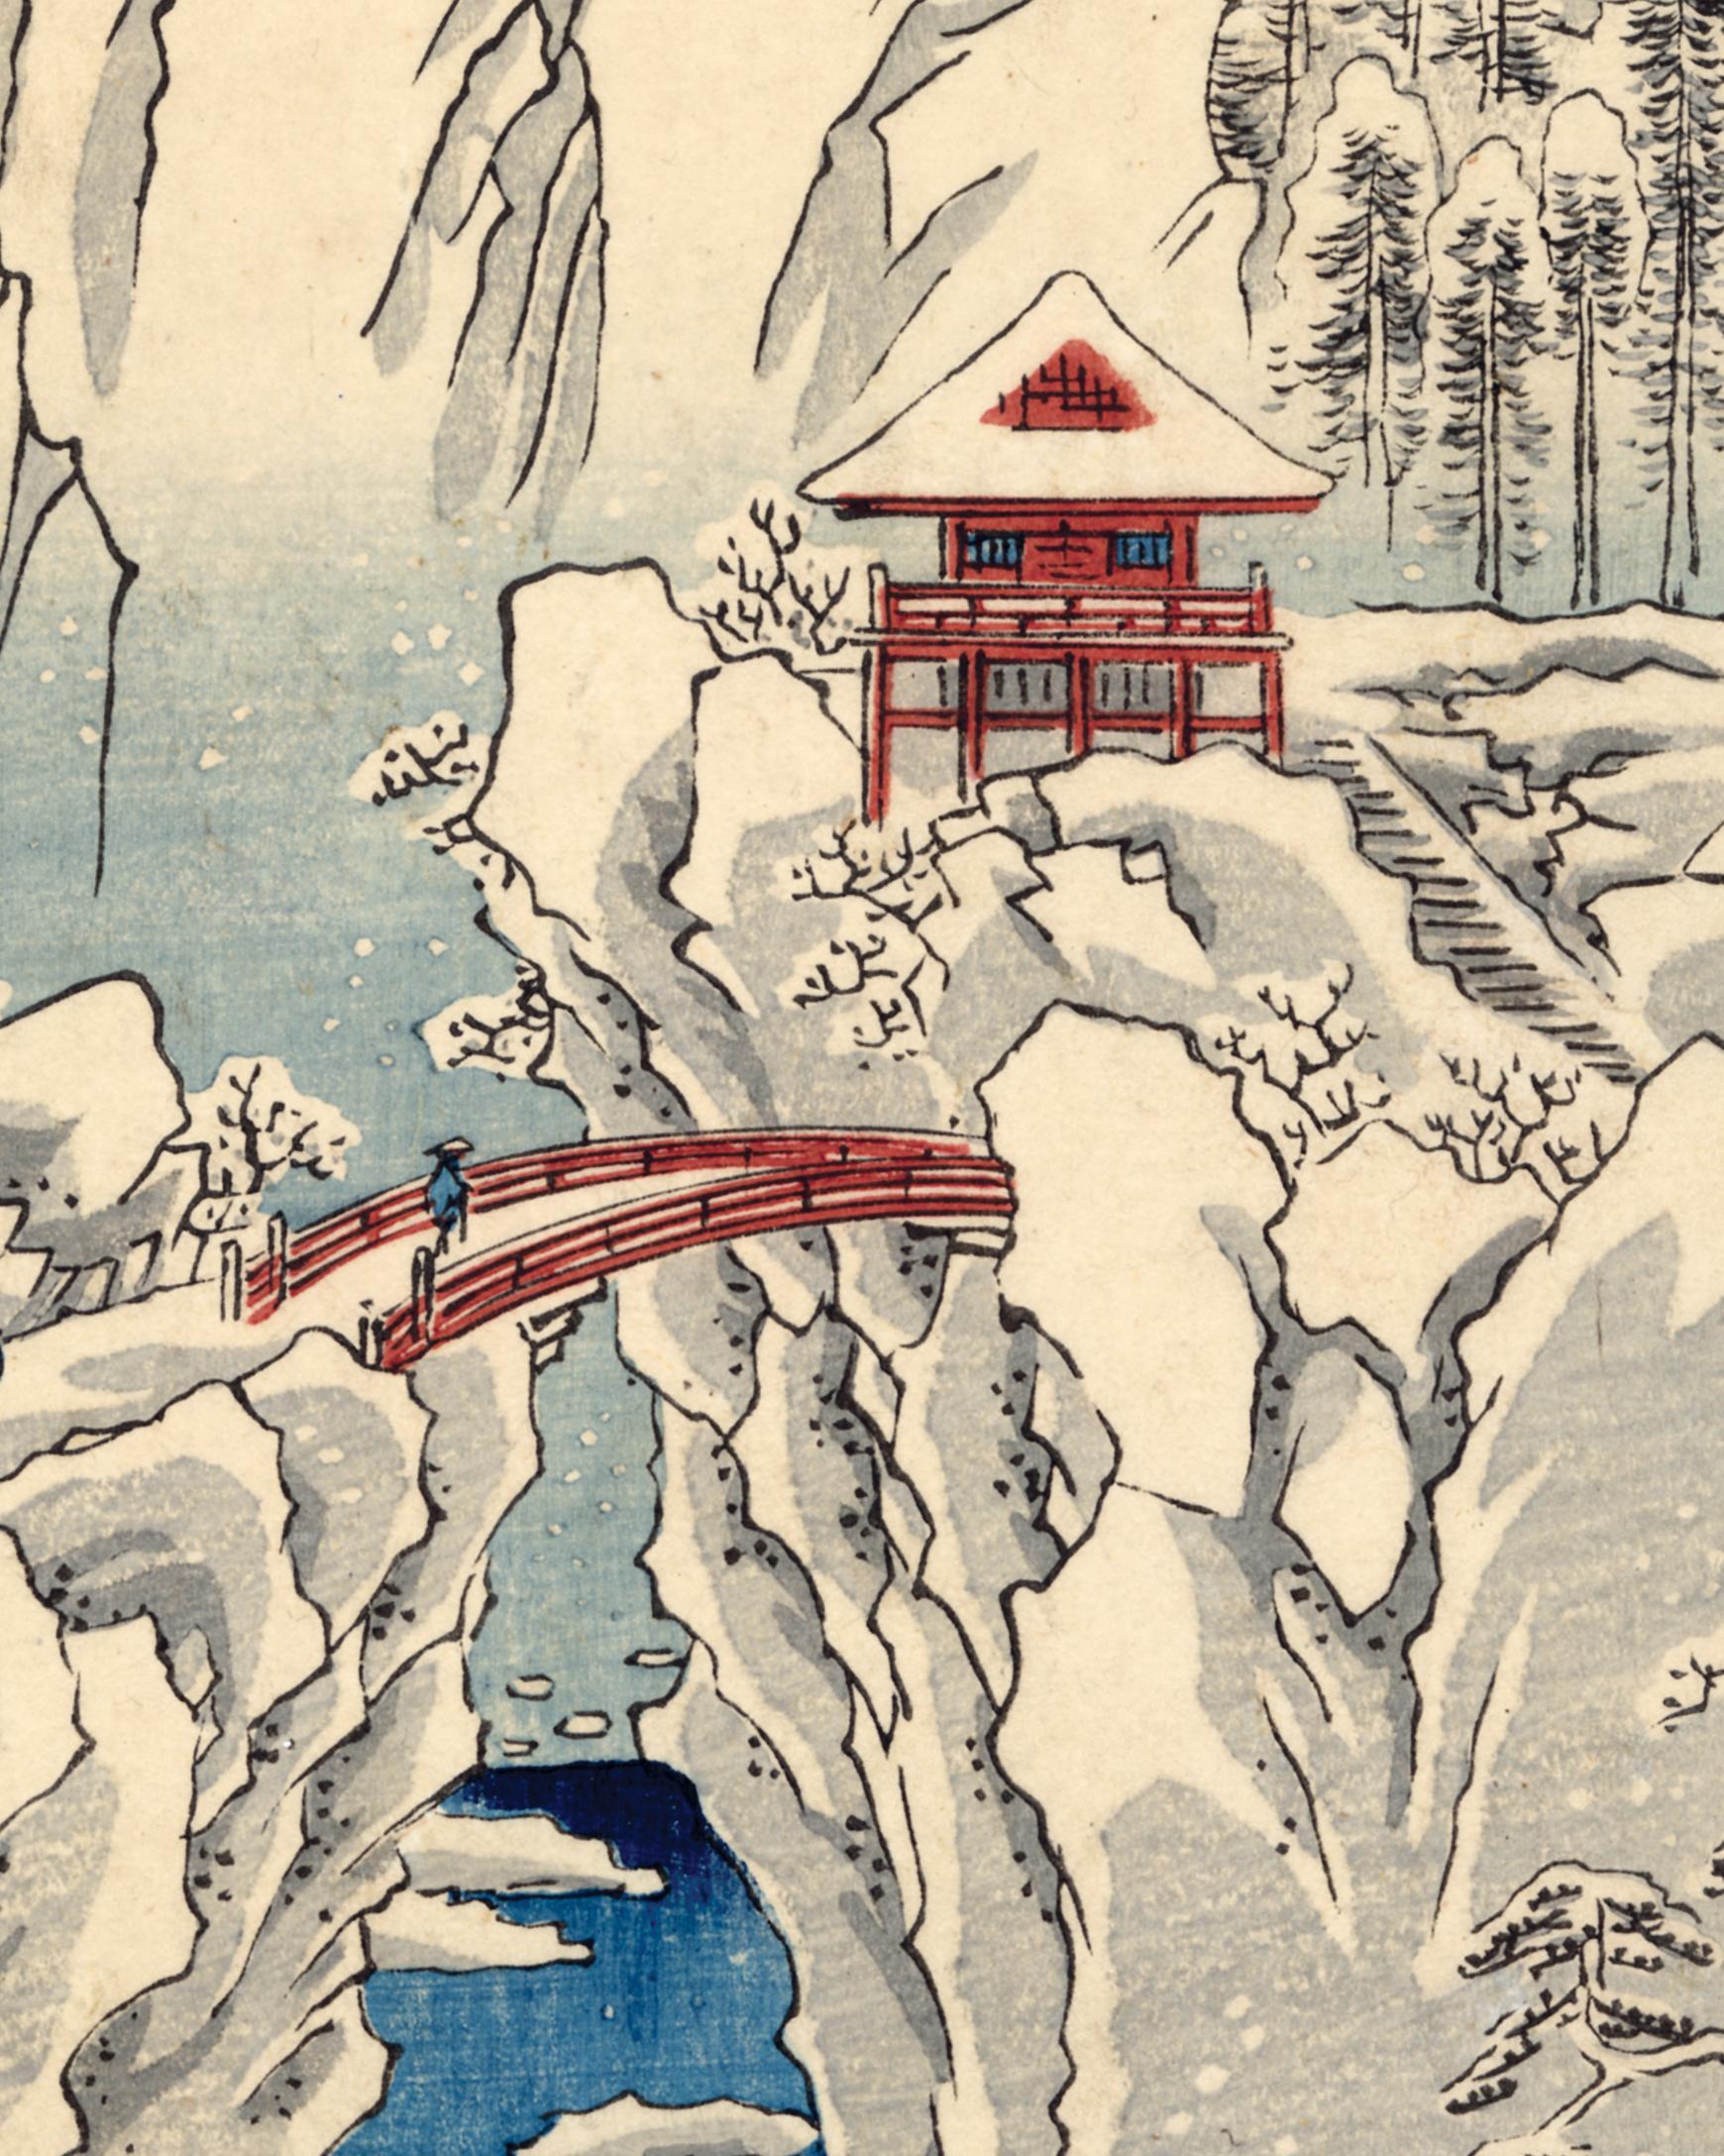 “Kôzuke Province, Mount Haruna Under Snow”. Haruna Temple, an important pilgrimage site and sanctuary, stands out in brilliant red against an imposing and snowy backdrop.  A solitary figure crosses the red bridge known as Ninuri hashi spanning the